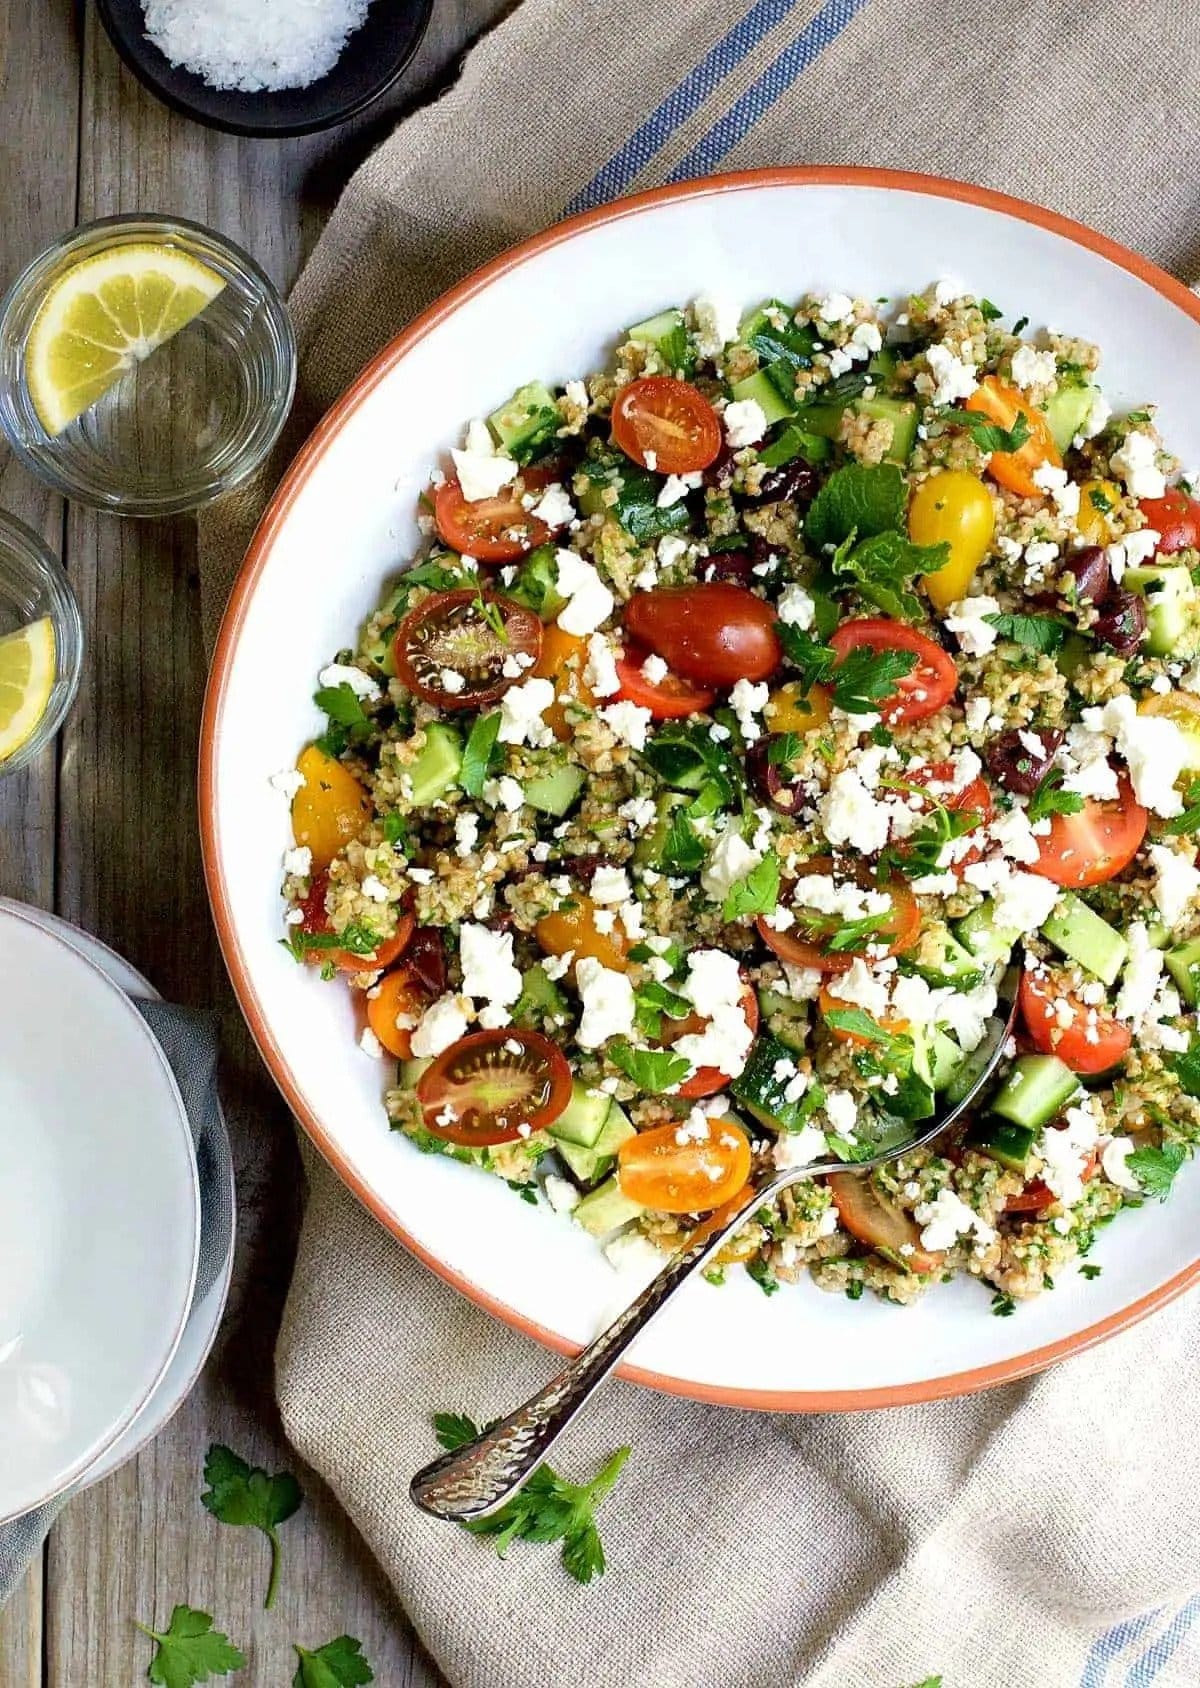 Tabouli Salad with Cucumber, Tomato, Feta, and Olives